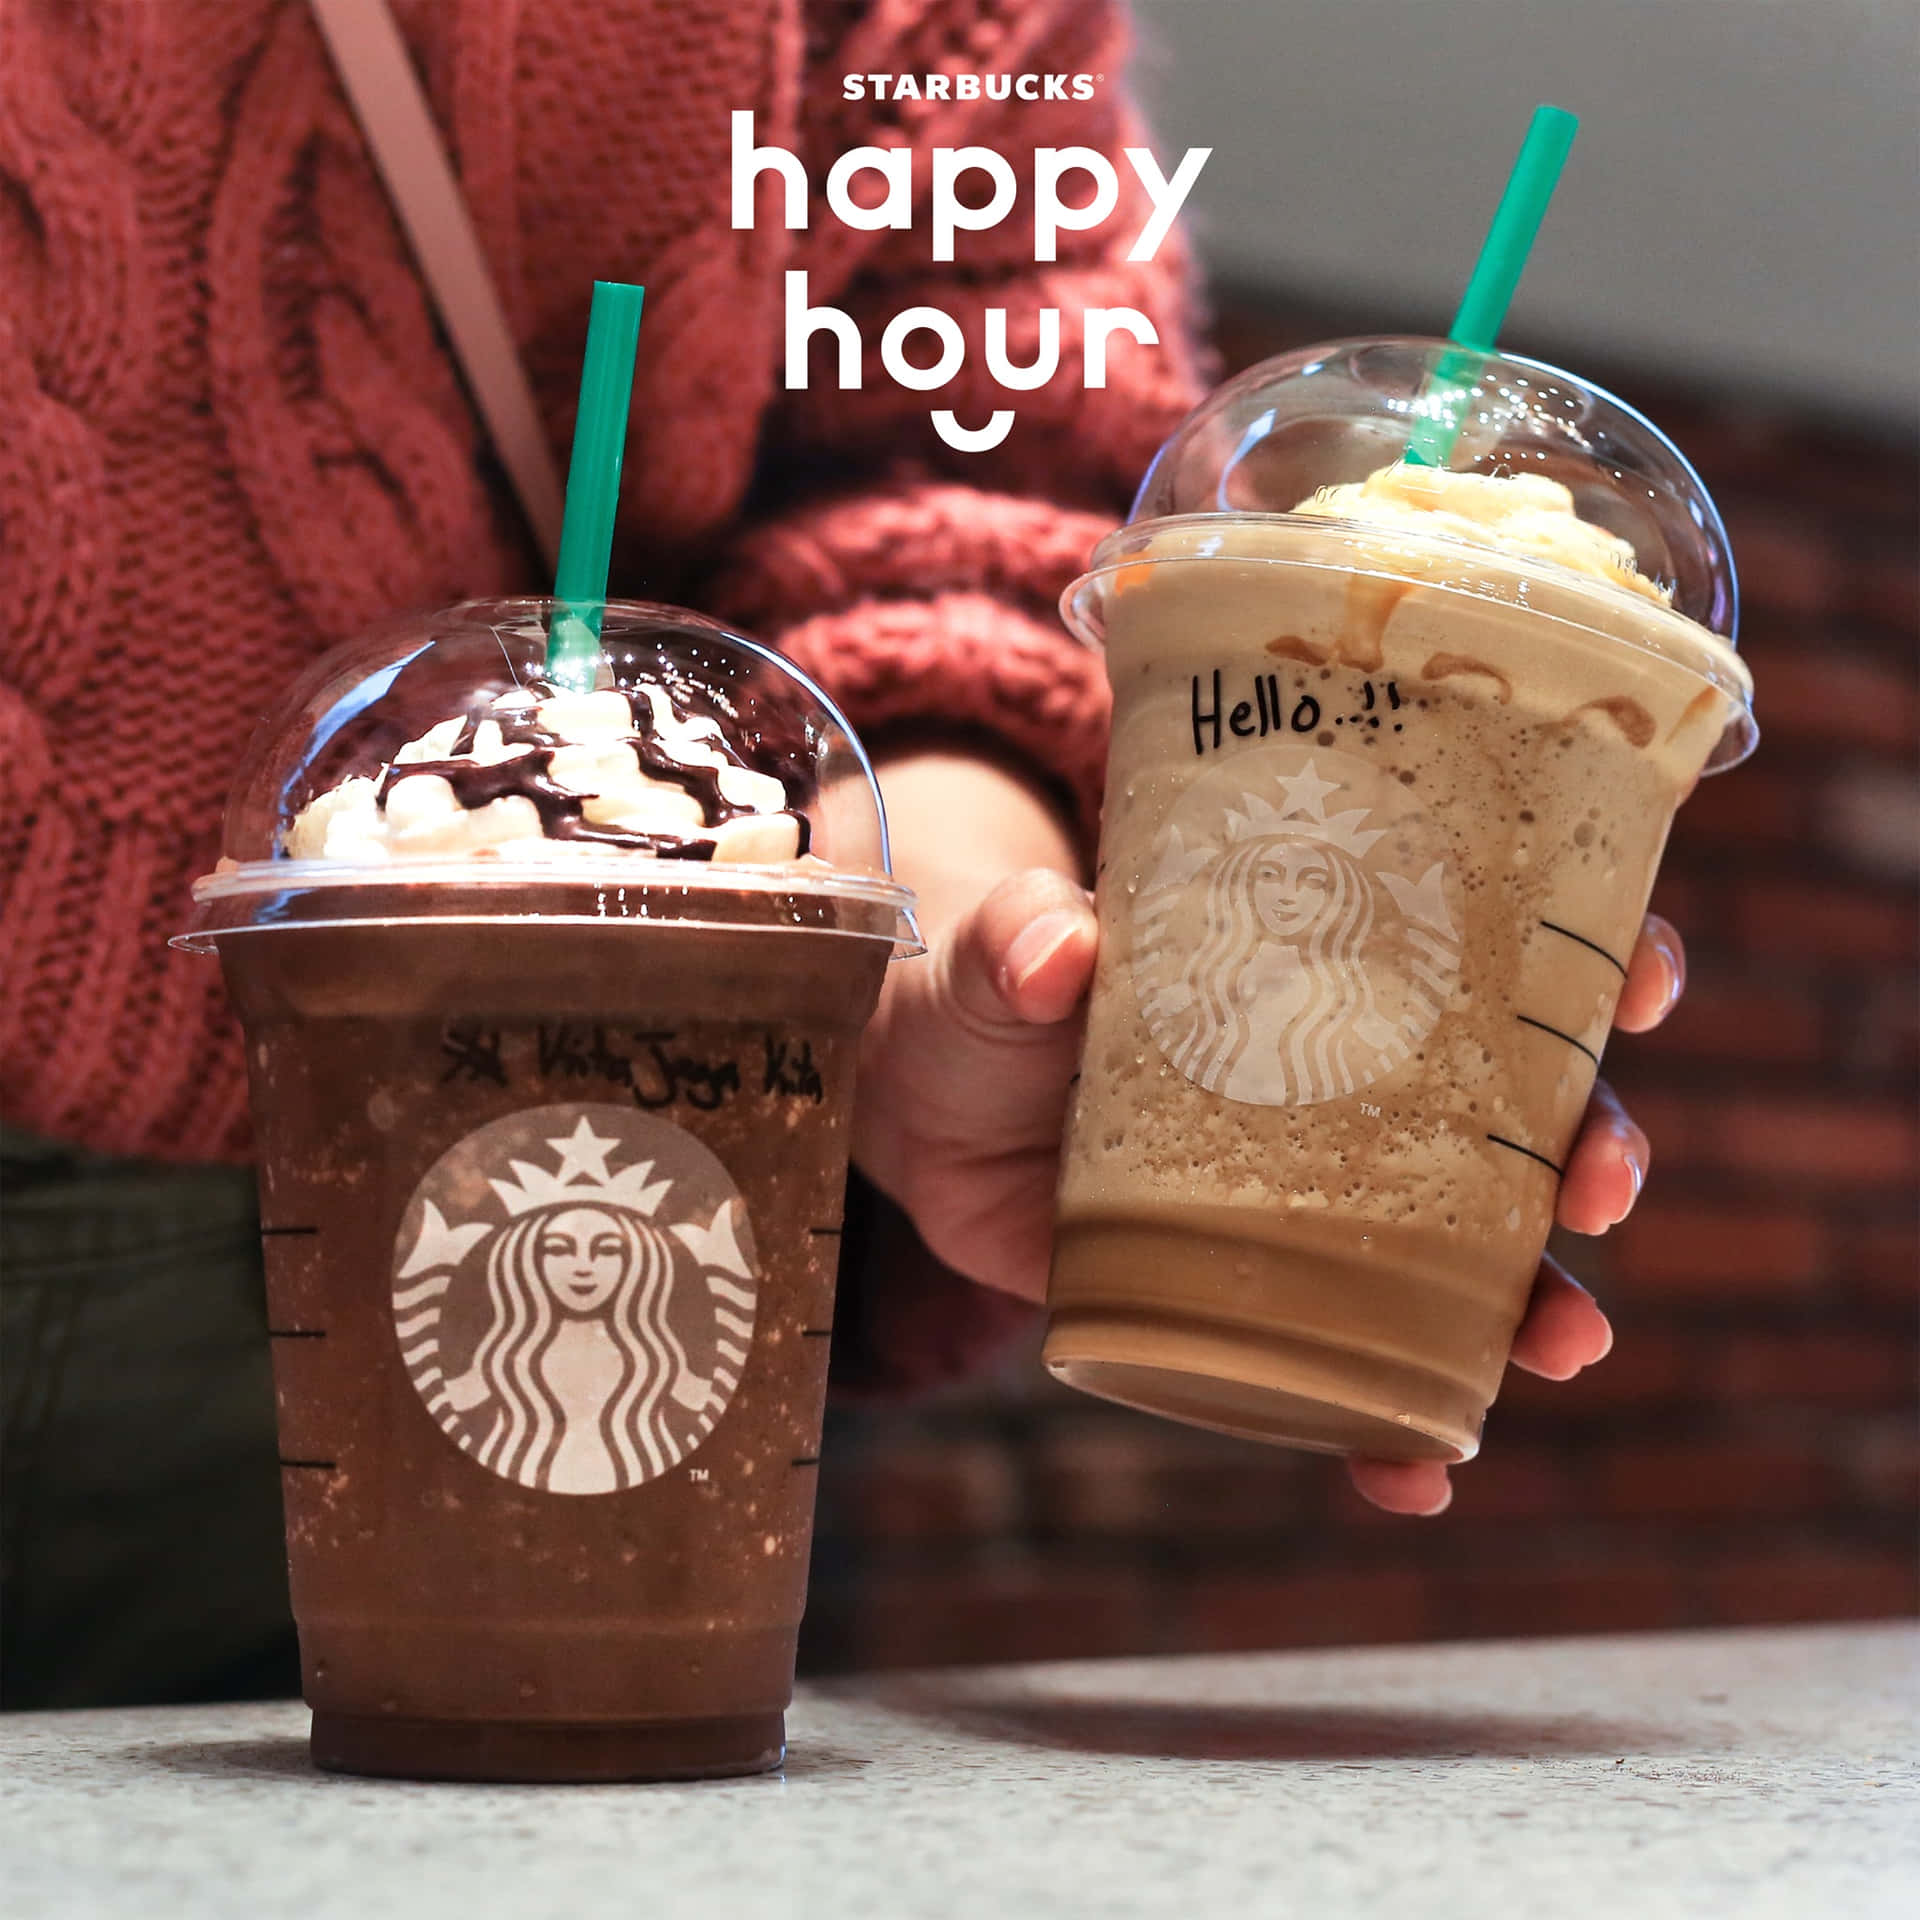 Start your day the right way with a warm cup of coffee from Starbucks.